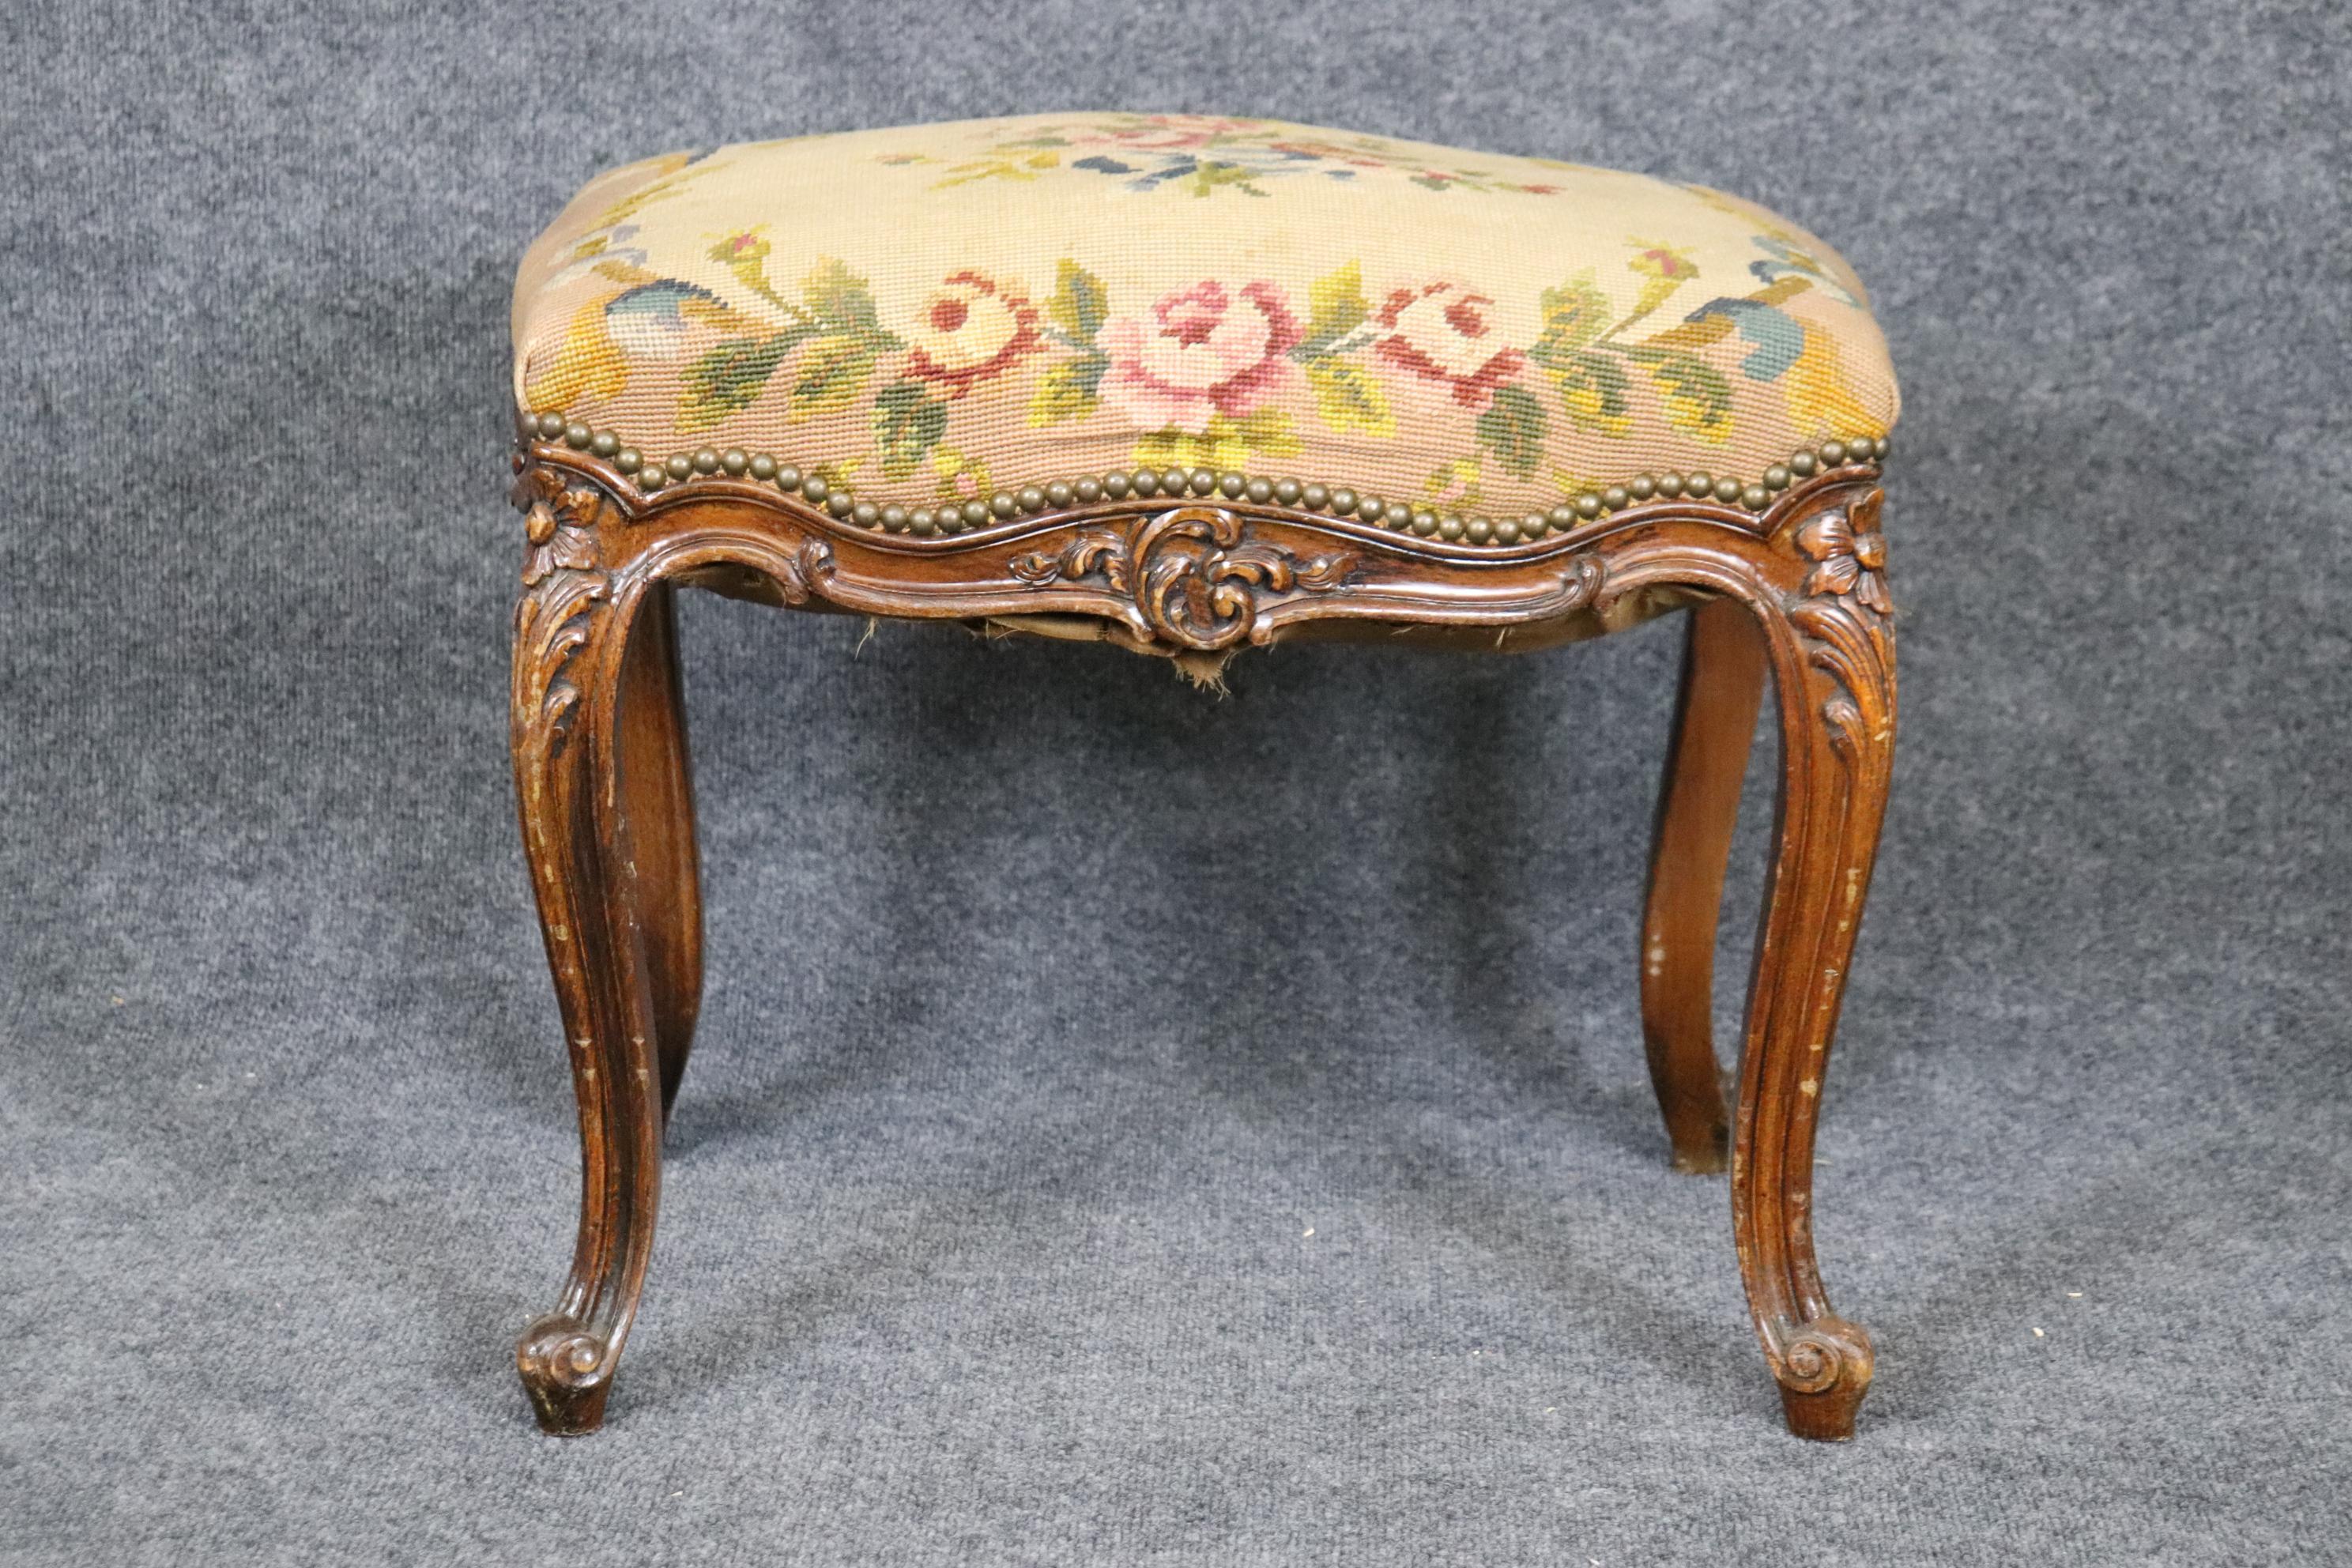 Late 19th Century French Louis XV Carved Walnut Distressed Antique Needlepoint Upholstered Stool  For Sale